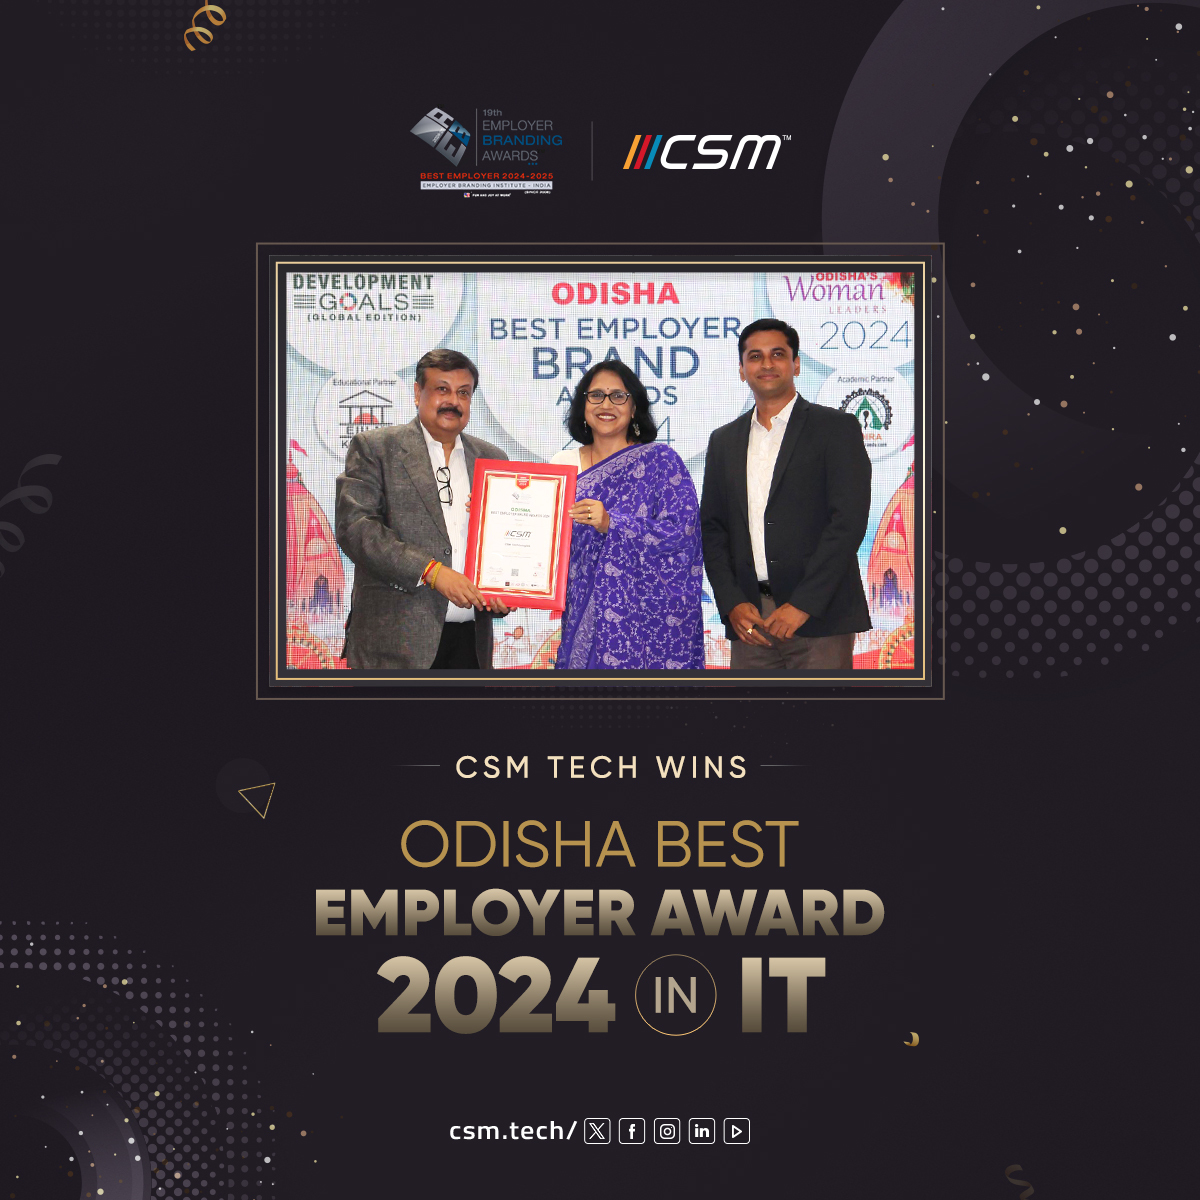 FY 24 off to a flier! It's a moment of pride for CSM Tech as we clinch the Odisha Best Employer Award 2024 in the IT category. Dedicated to every CSMer across the globe! #CSMTech #BestEmployer #EmployerAwards #IT